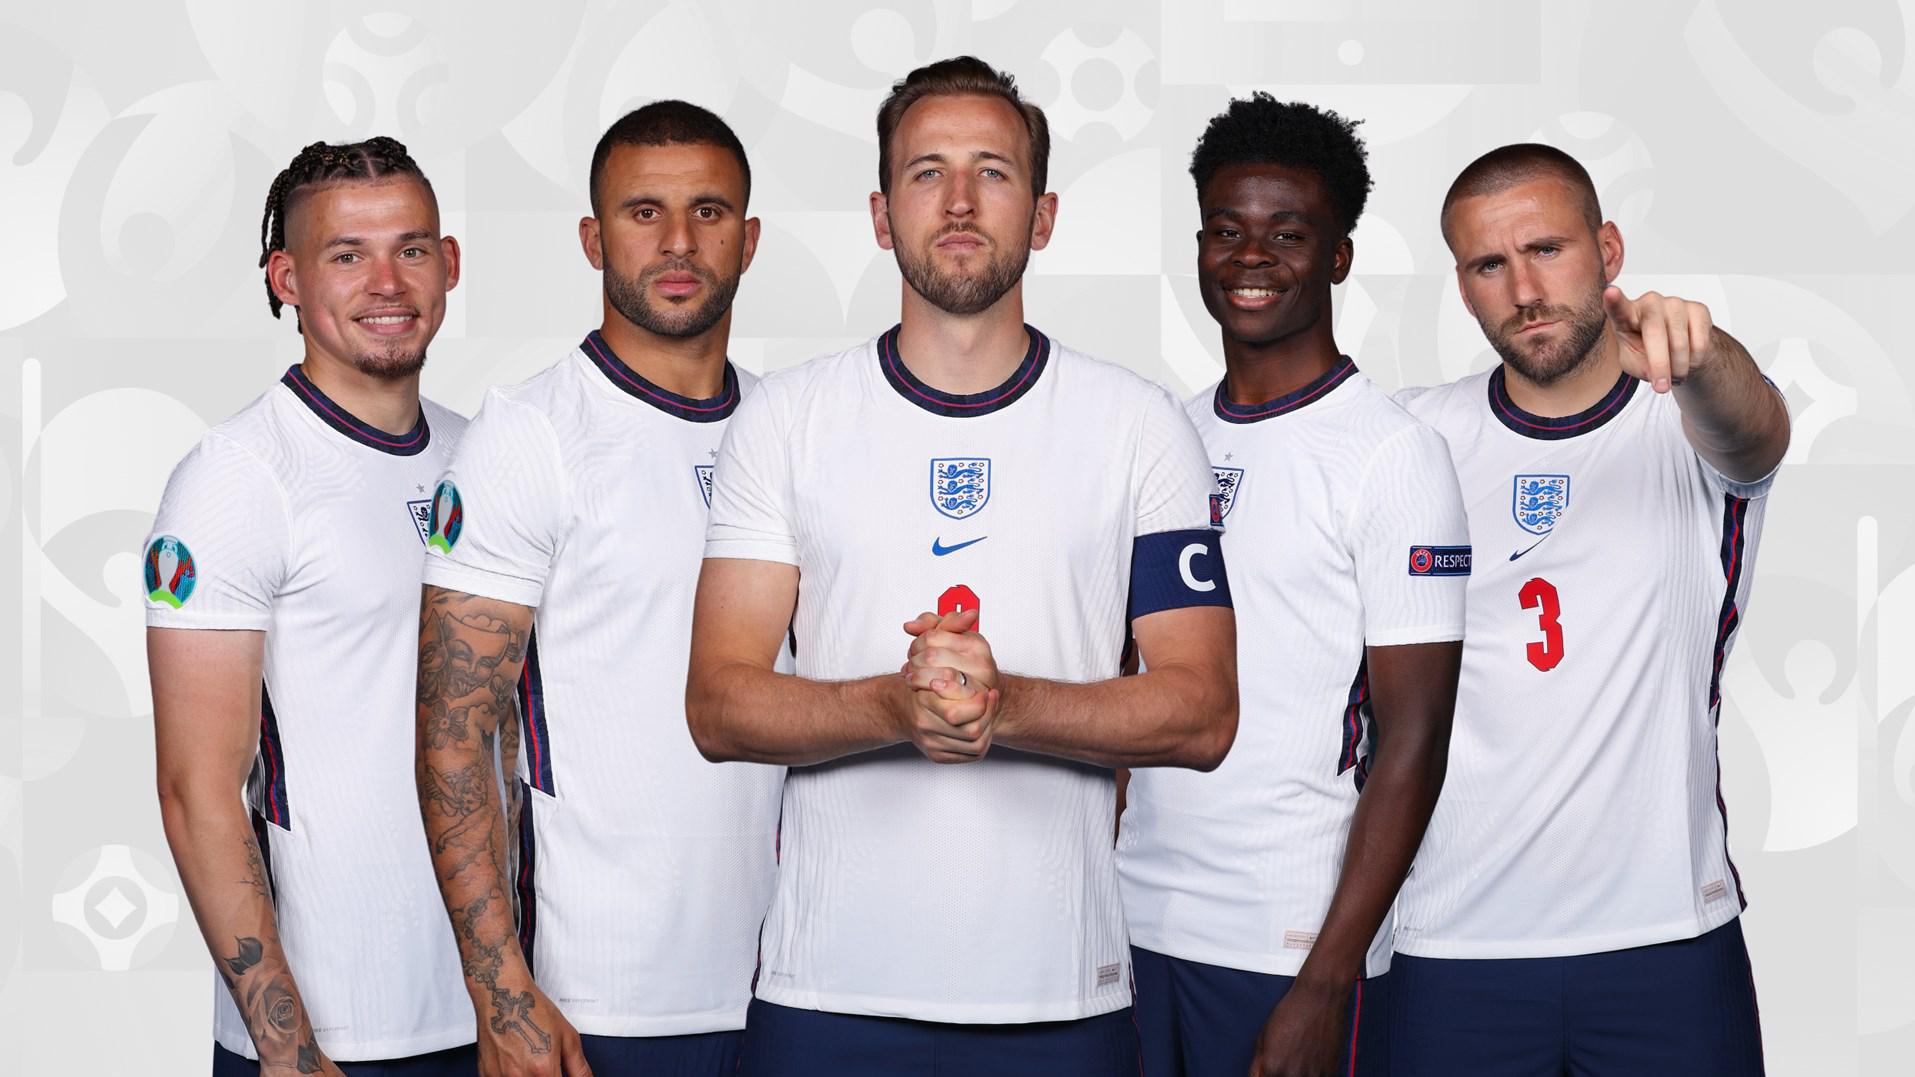 The hottest England football team players to get behind before the Euros  2020 Finals